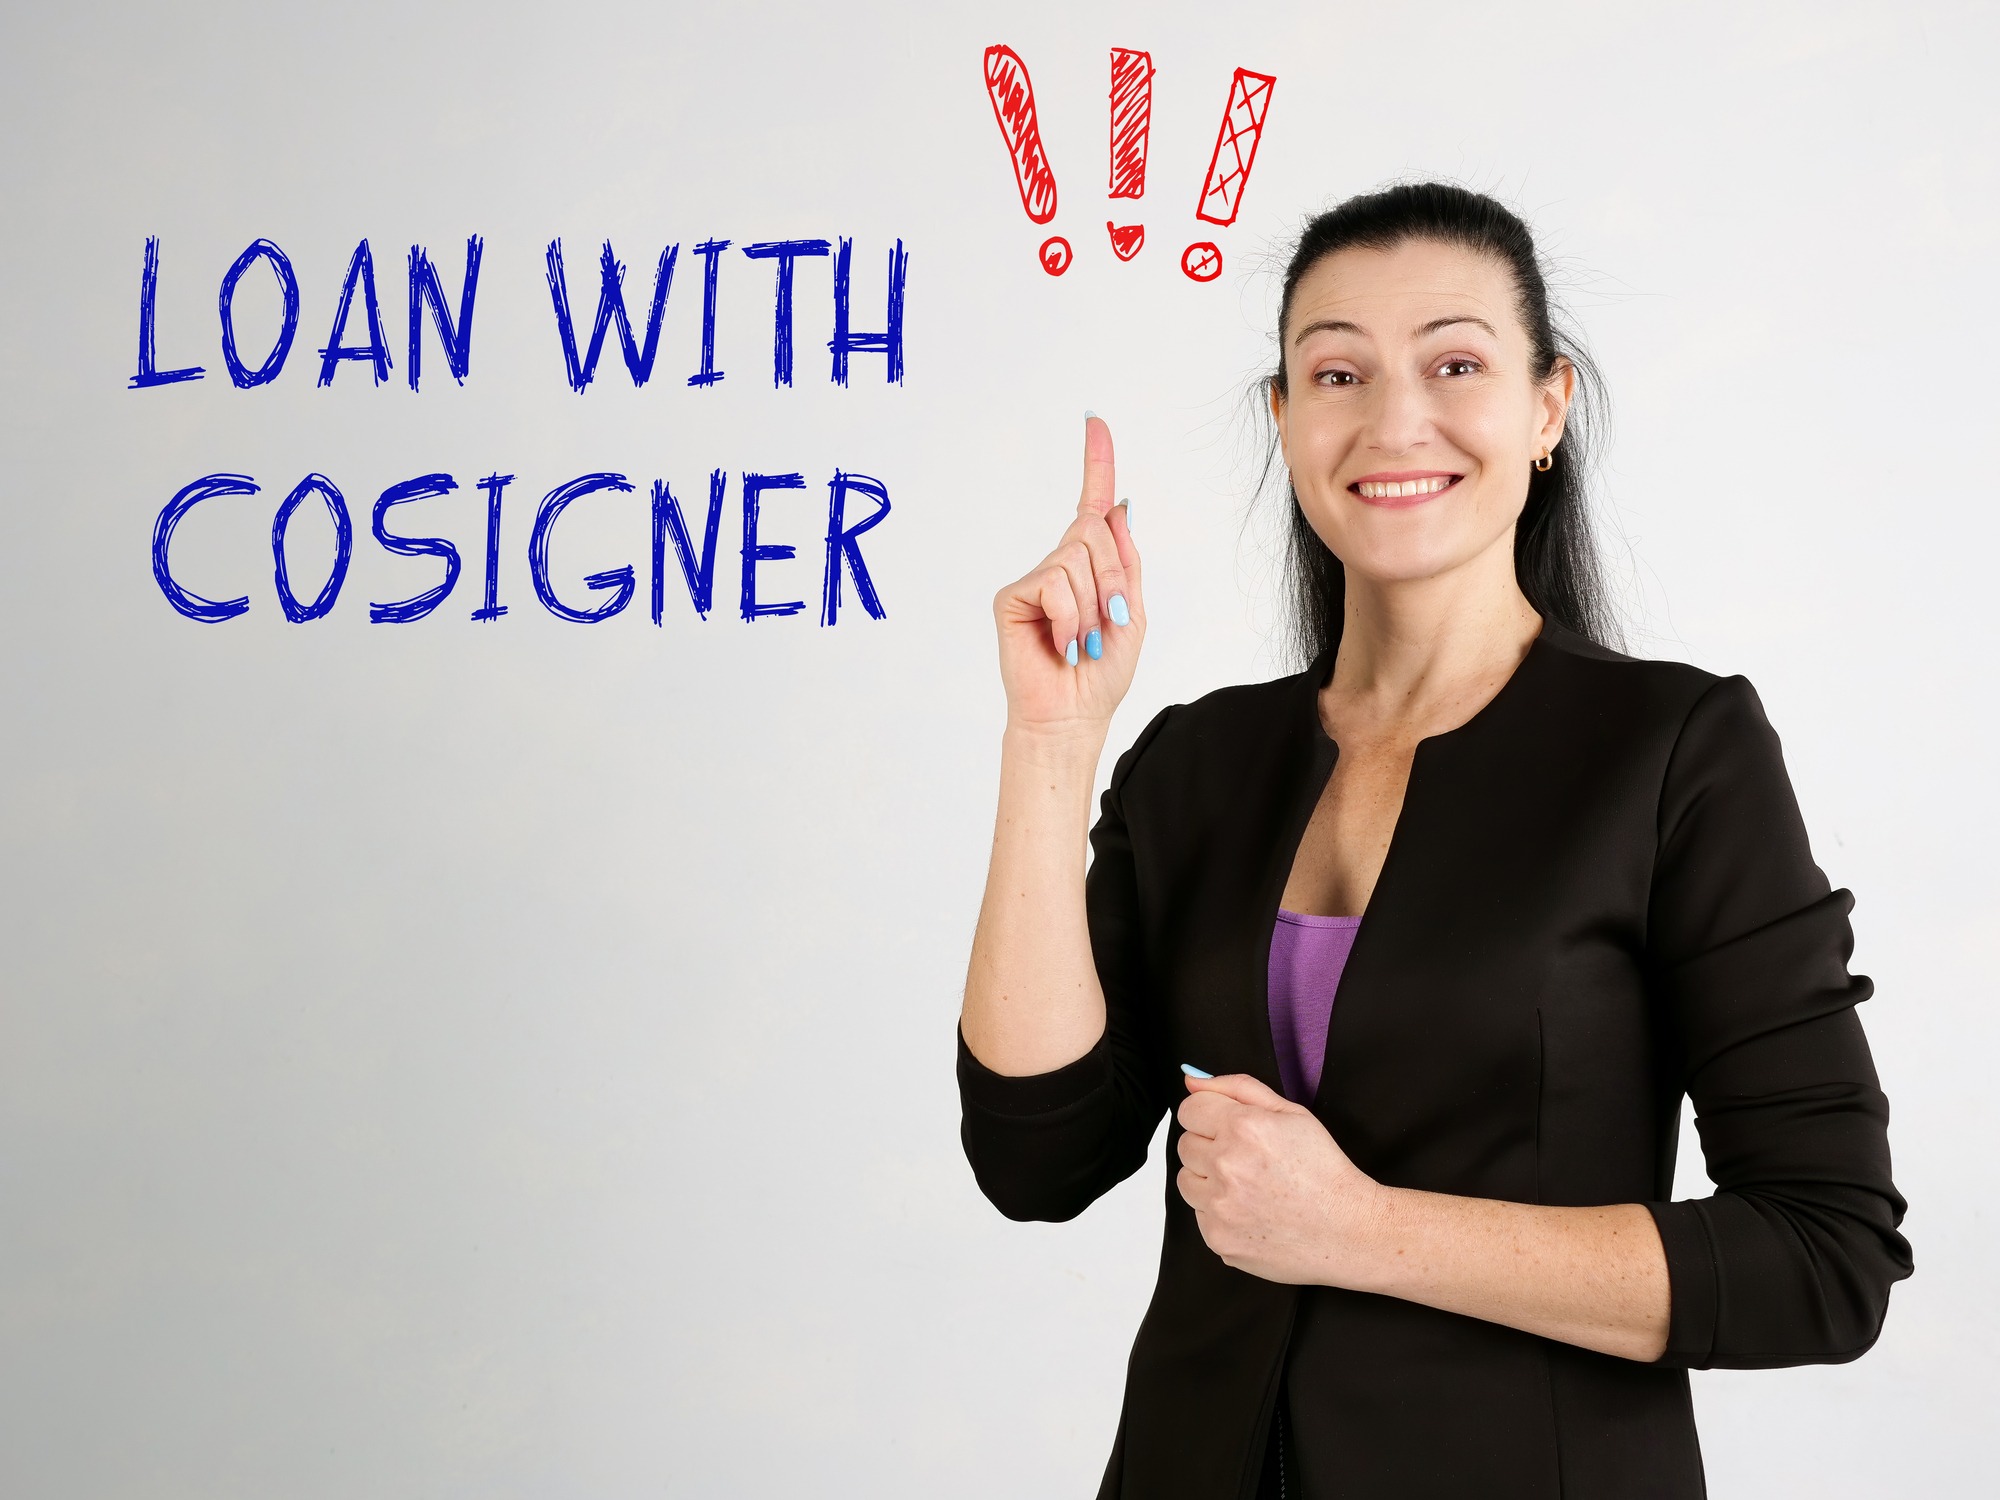 Business concept about LOAN WITH COSIGNER exclamation marks with